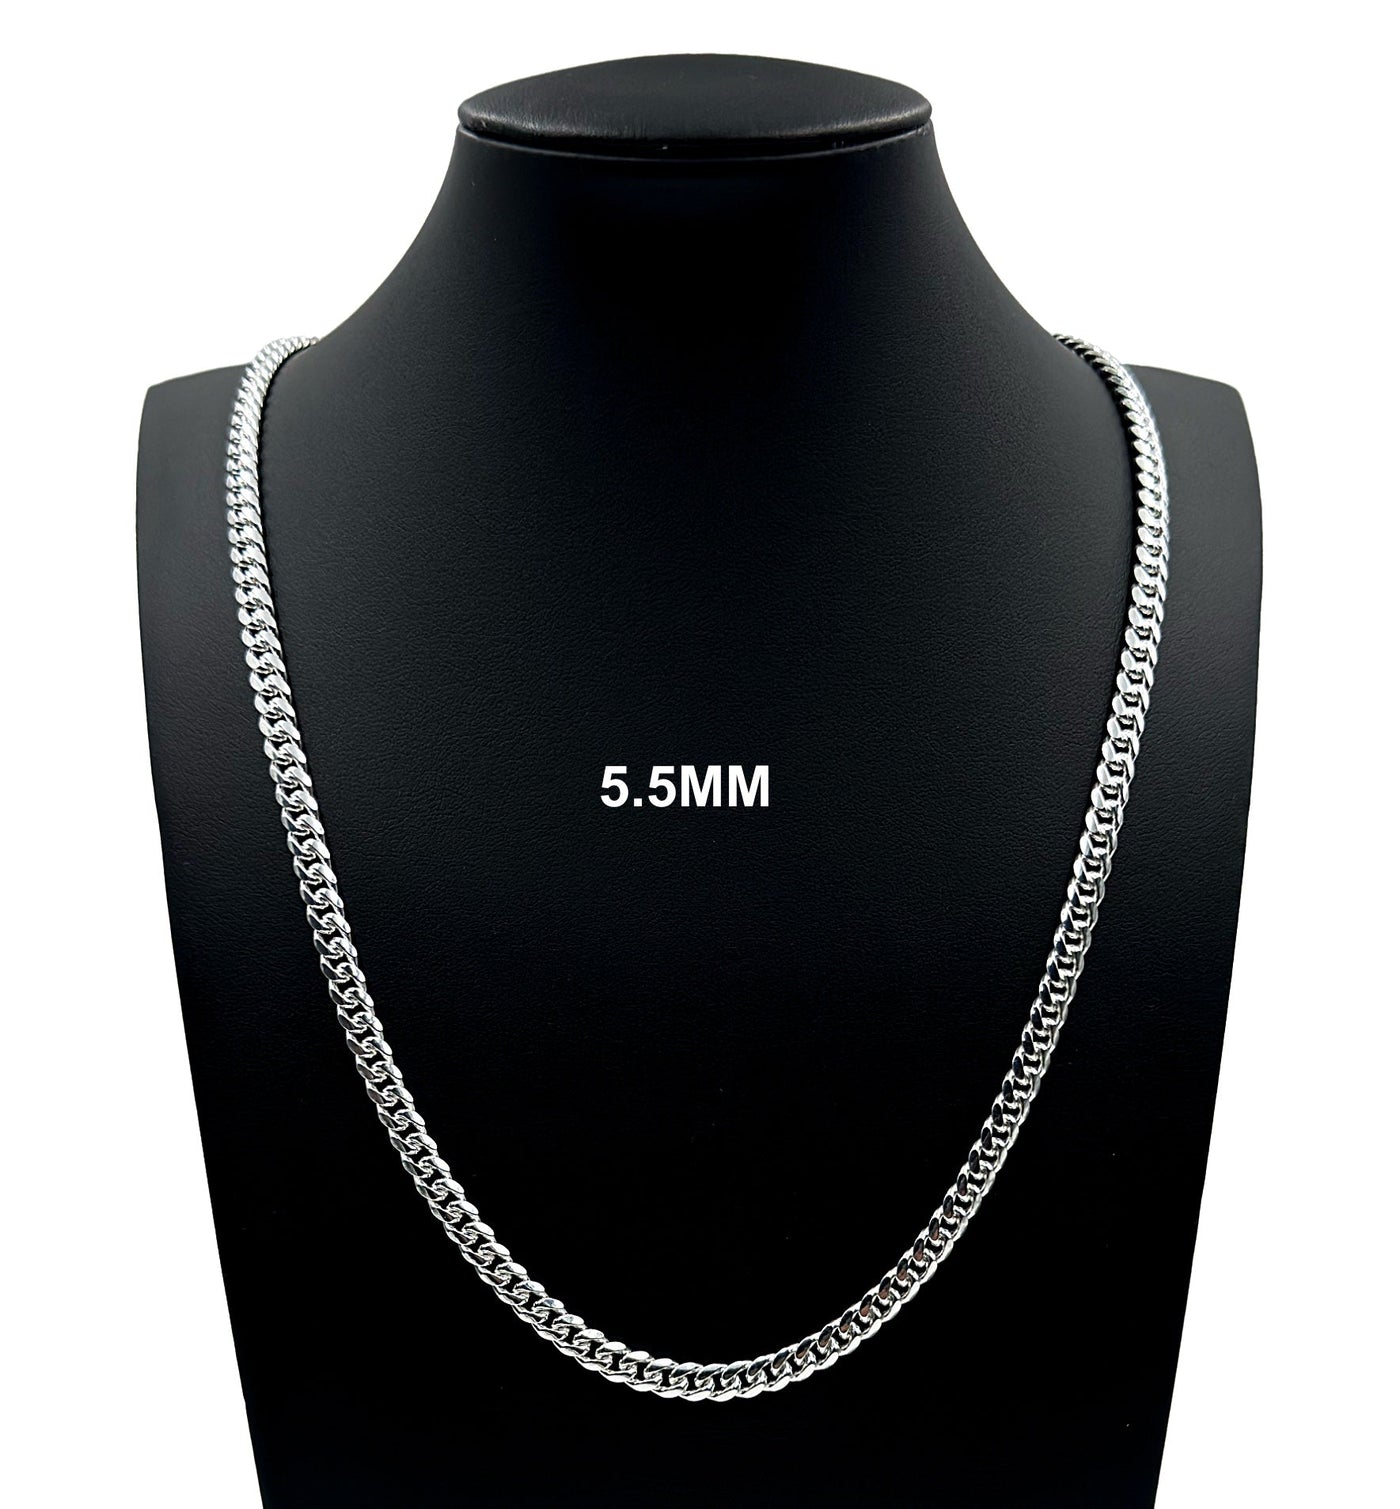 5.5MM Solid 925 Sterling Silver Miami Cuban Link Chain Necklace or Bracelet ITALY